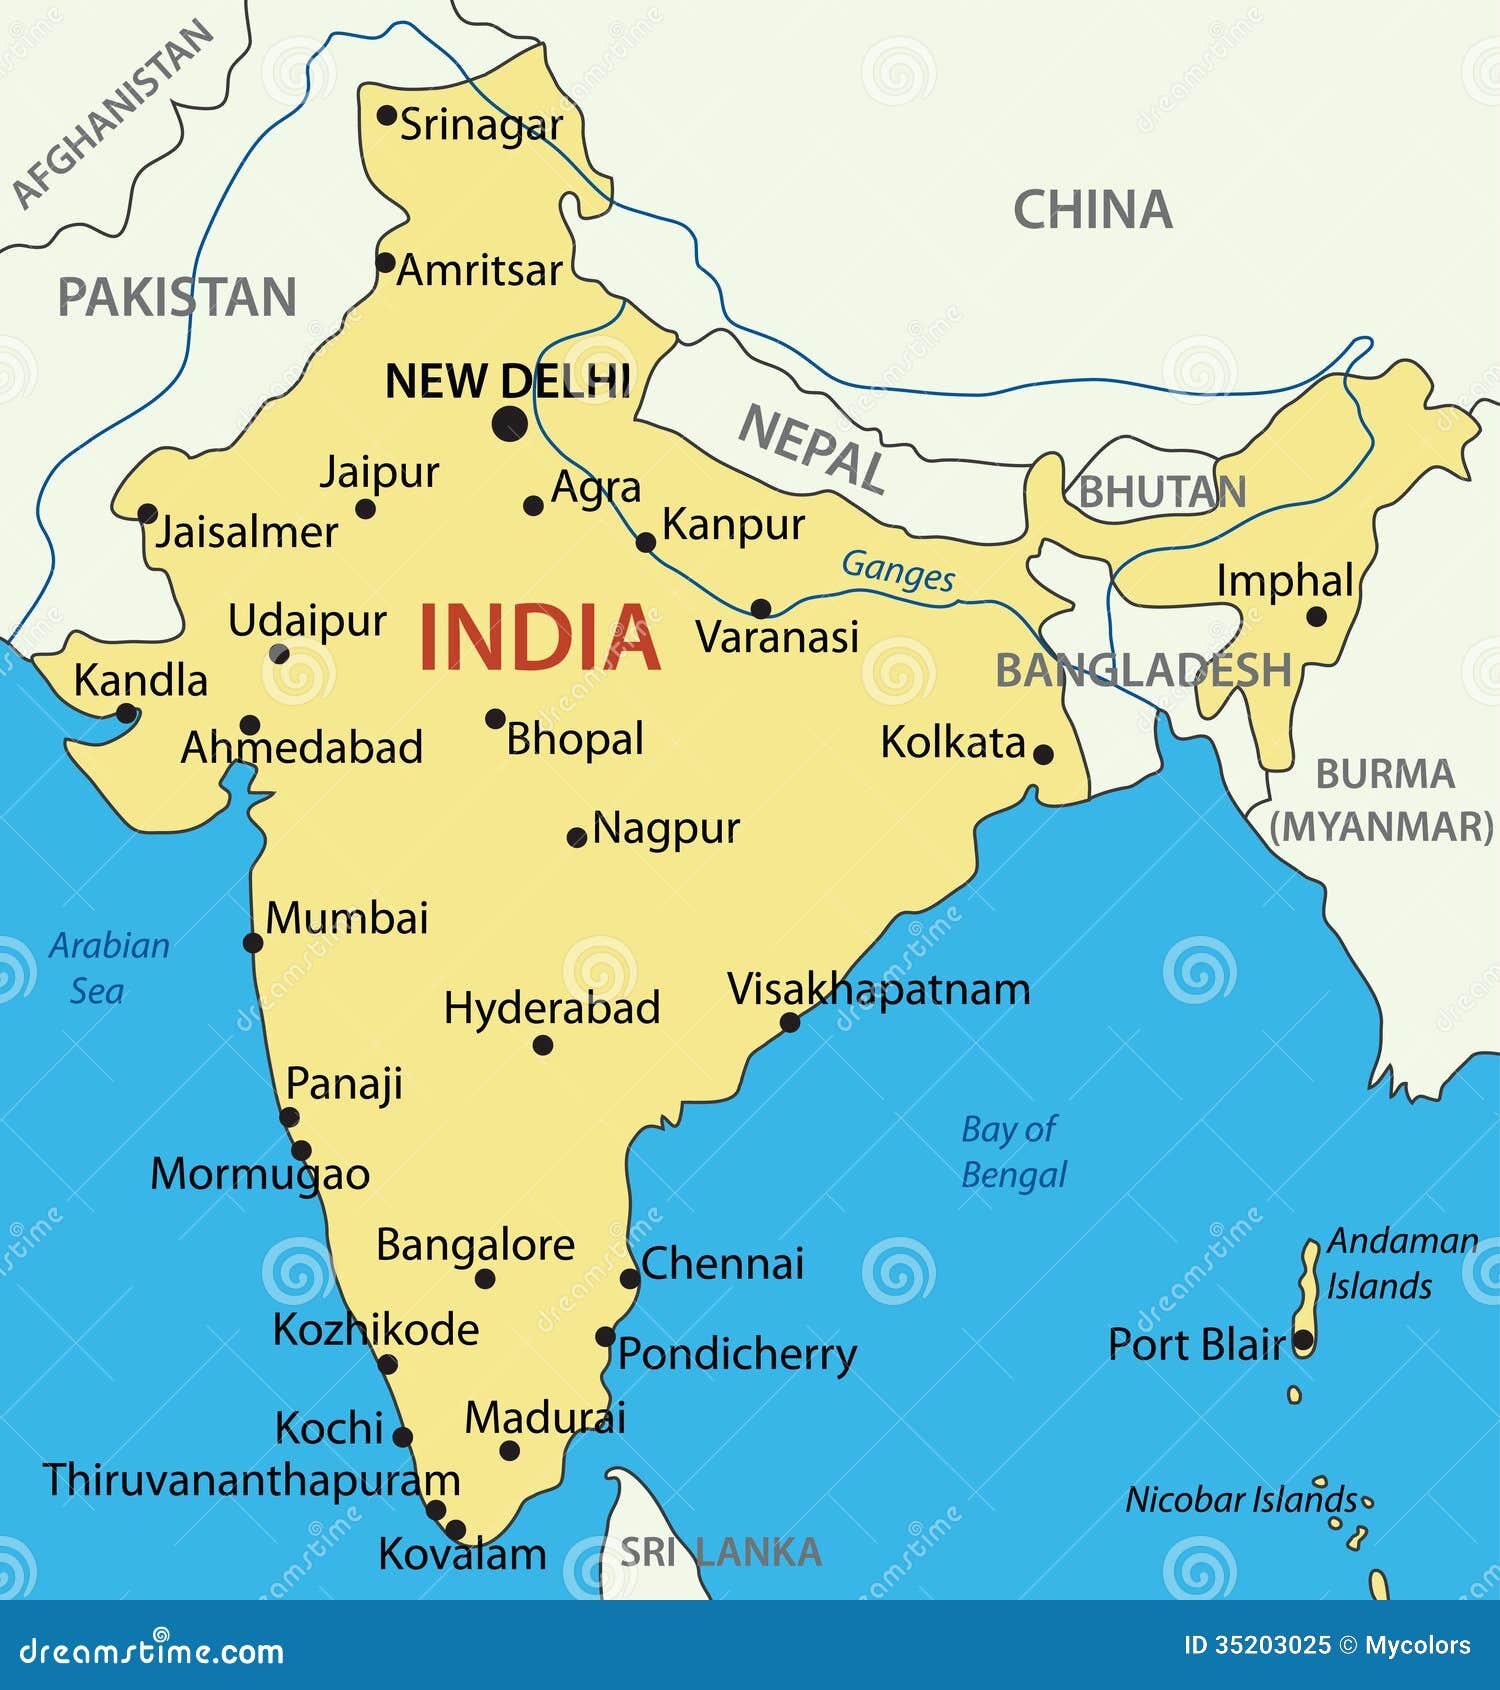 Republic Of India Map Royalty Free Stock Images - Image: 26044809